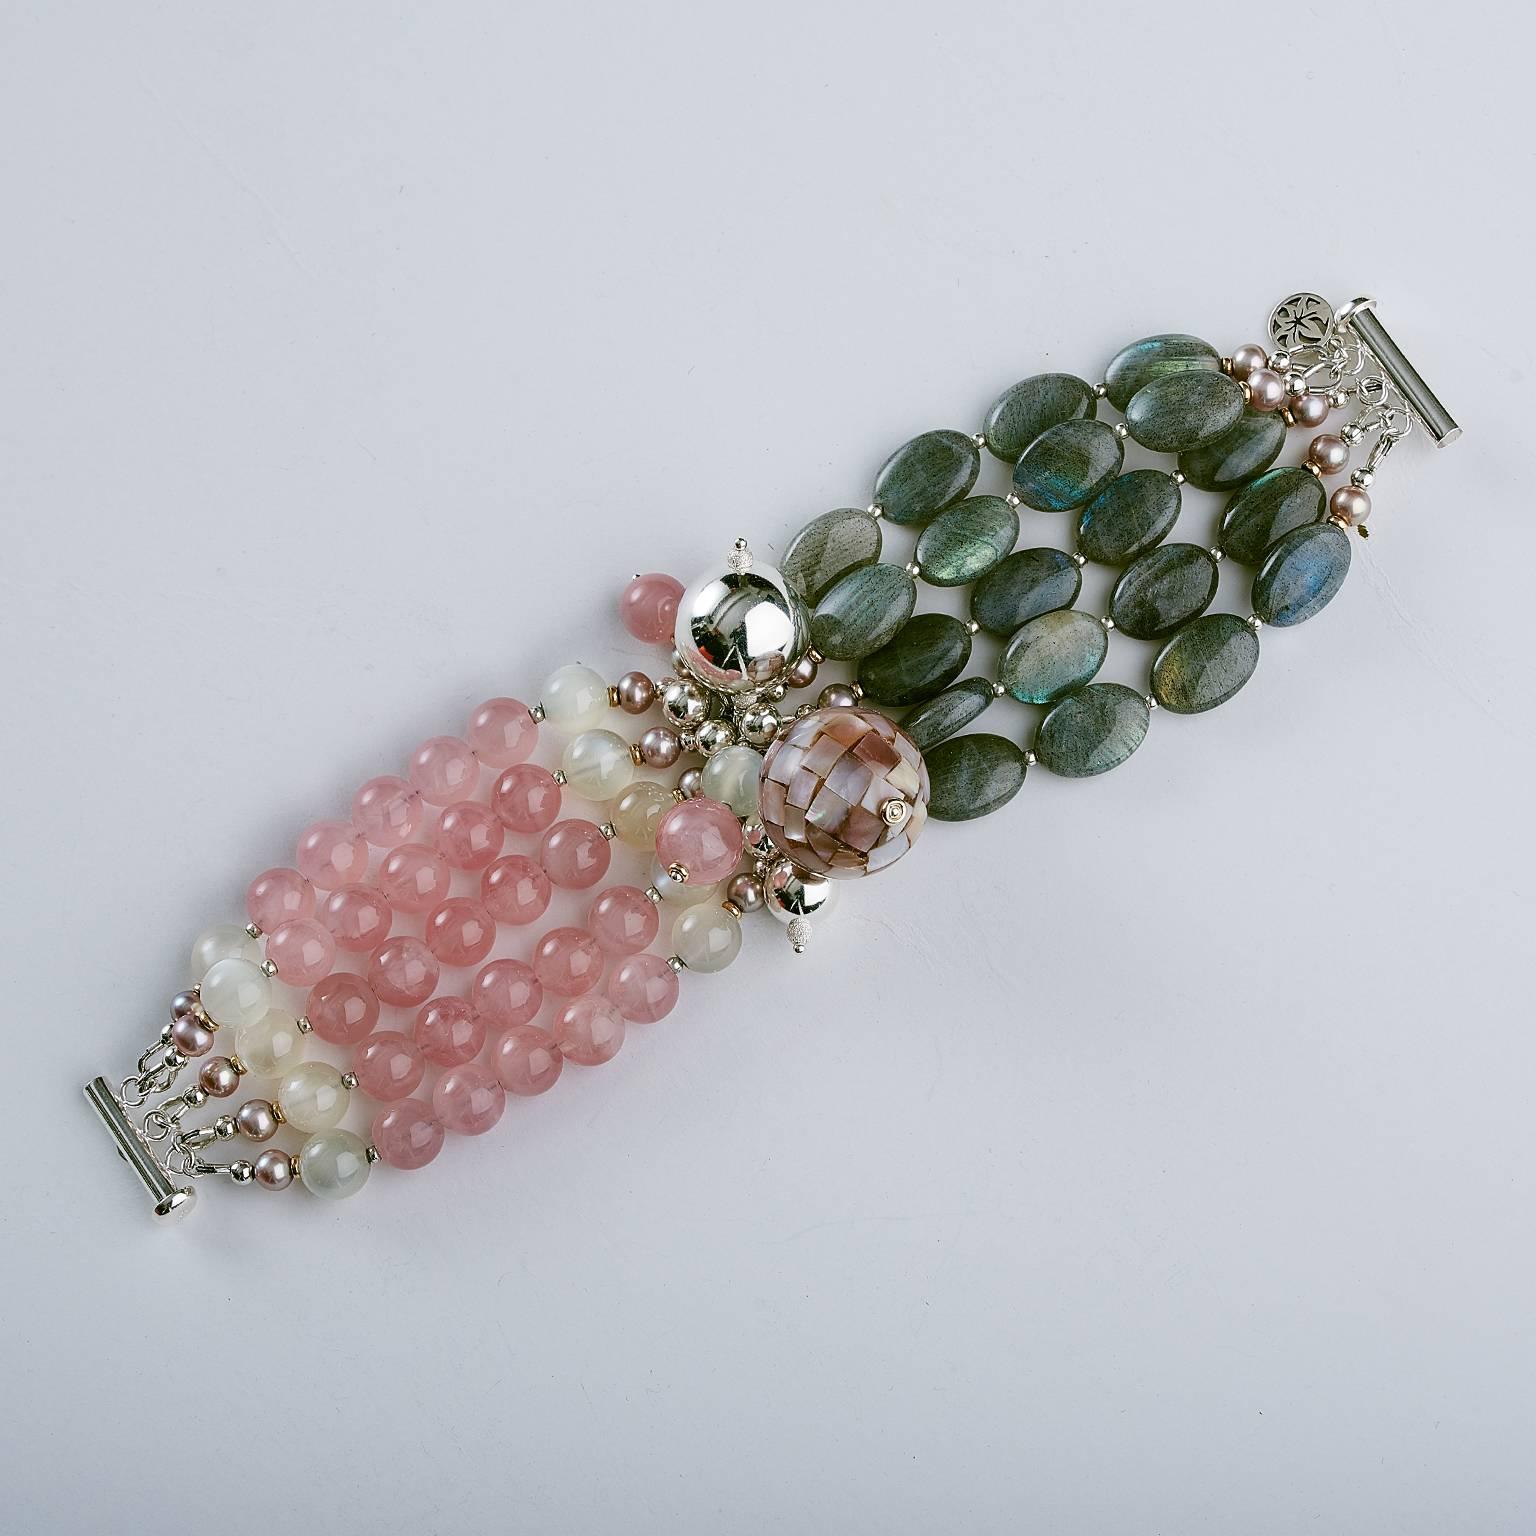 Five strands beaded bracelet created with round Madagascar rose quartz and gray moonstone combination with oval labradorite beads.  Silver accented by shiny multi size beads, 14K yellow roundels and featured pink 20 mm mother of pearls bead and two